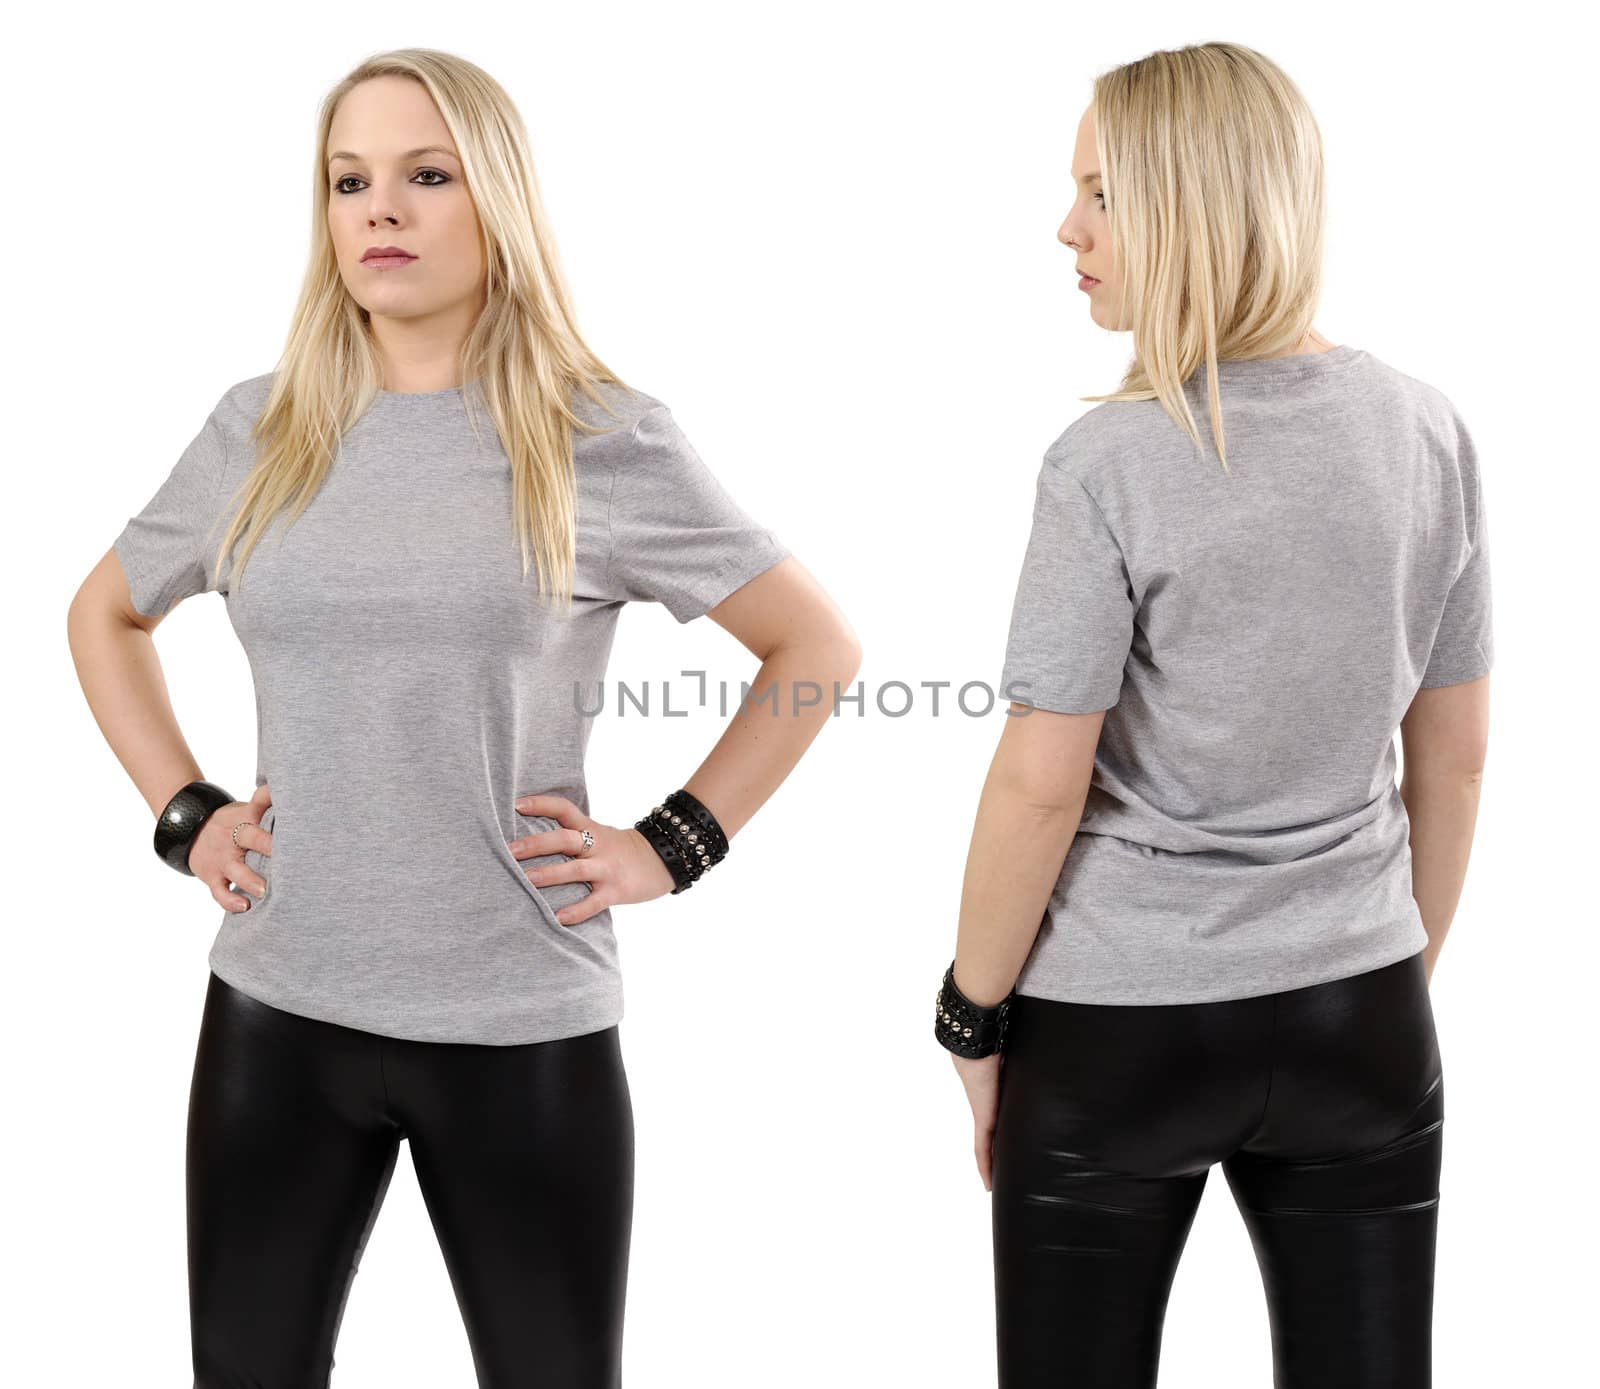 Blond woman posing with blank gray shirt by sumners